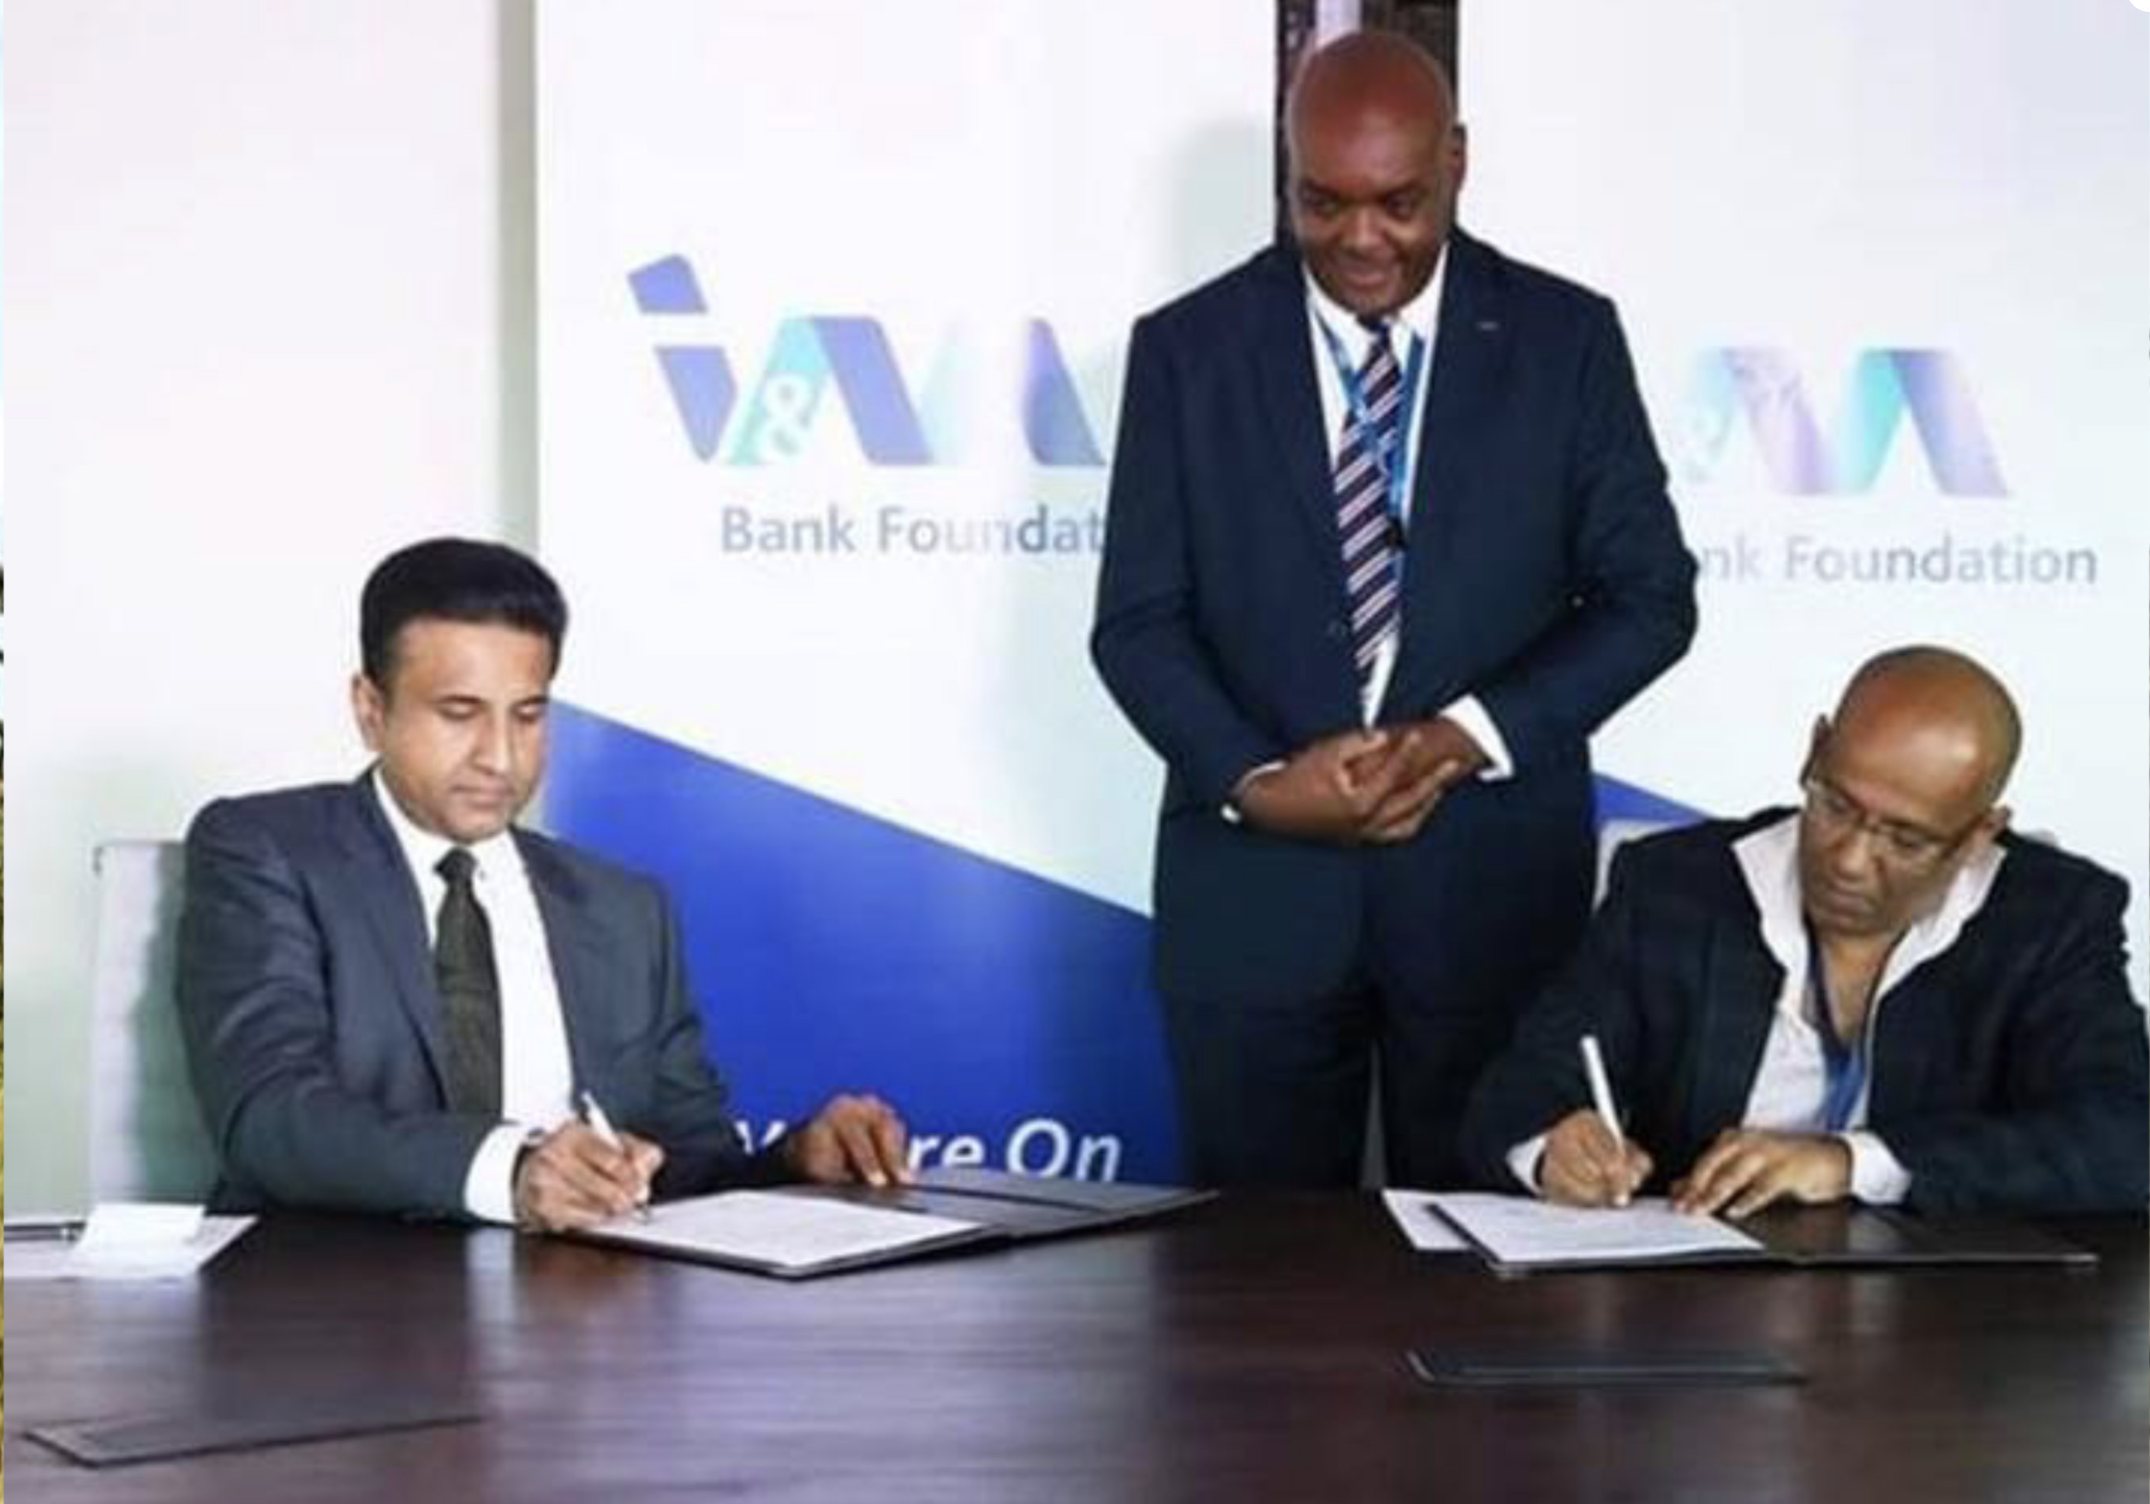 I&M Bank Foundation partners with Shamas Rugby Foundation on Life Skills Development for Youth